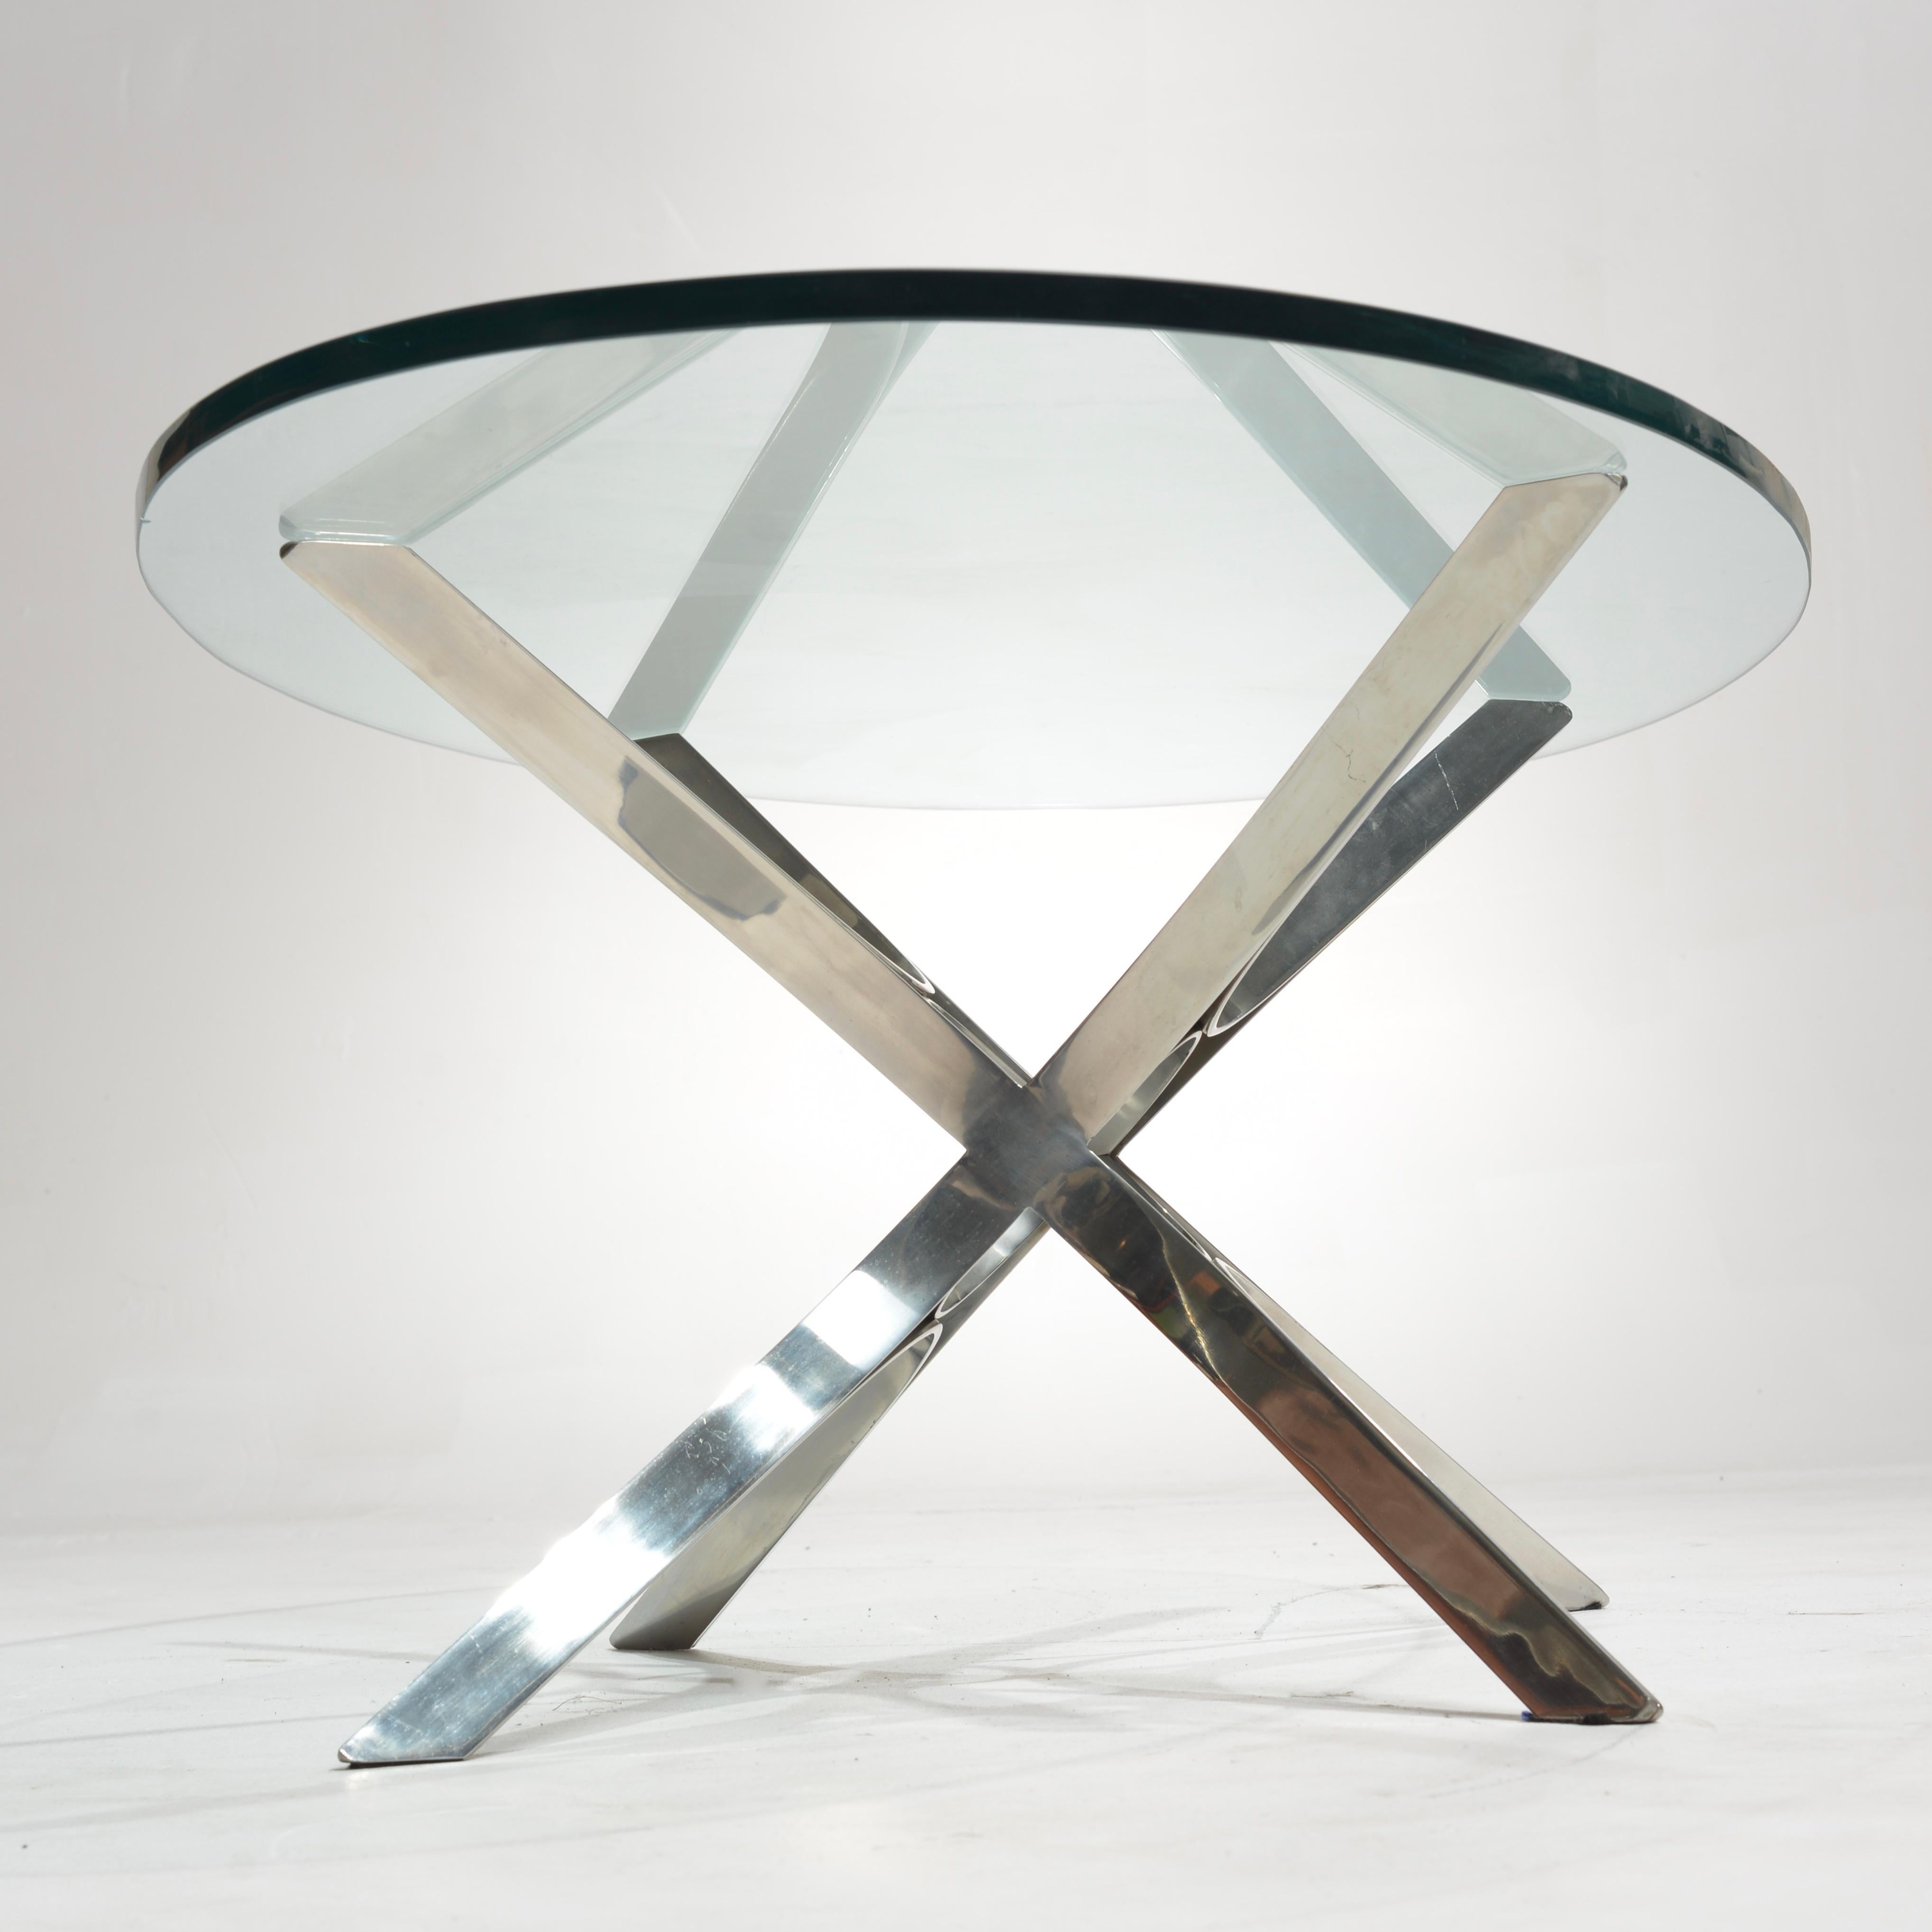 Modern Sculptural Stainless Steel and Glass Coffee Table by Roger Sprunger for Dunbar For Sale